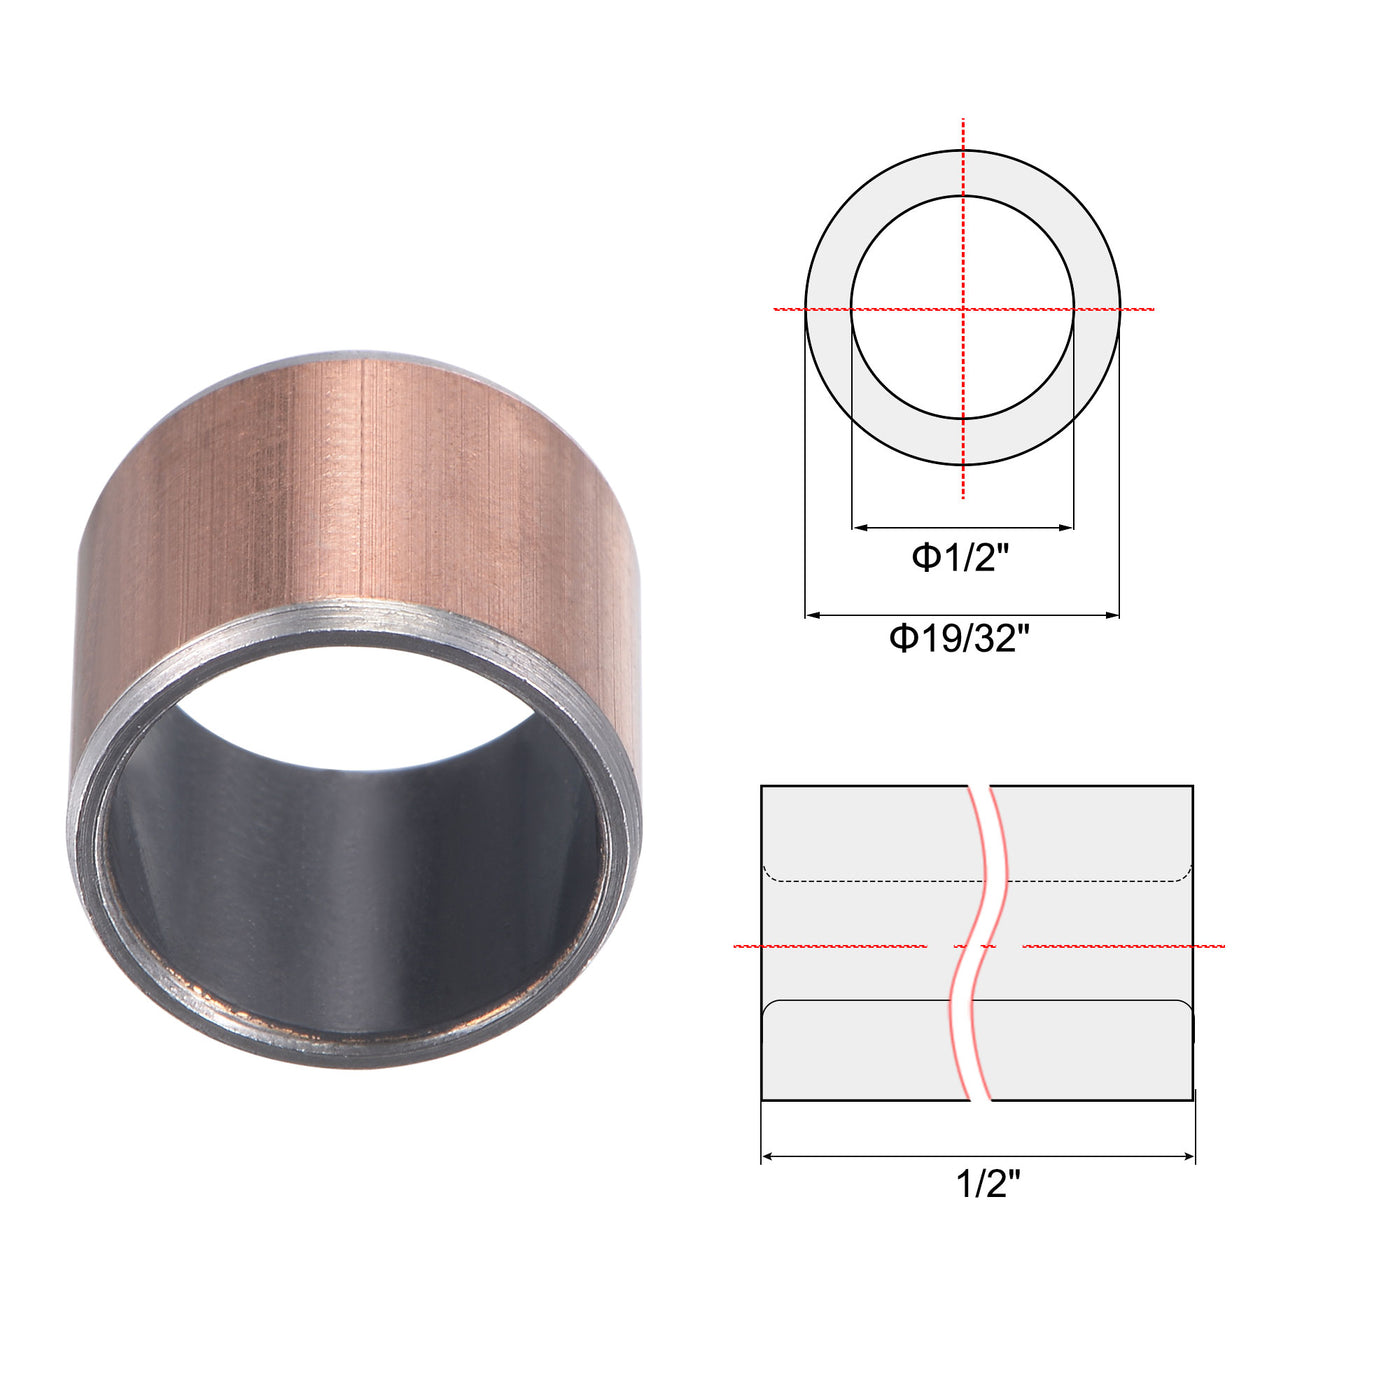 uxcell Uxcell Sleeve (Plain) Bearings Wrapped Oilless Bushings